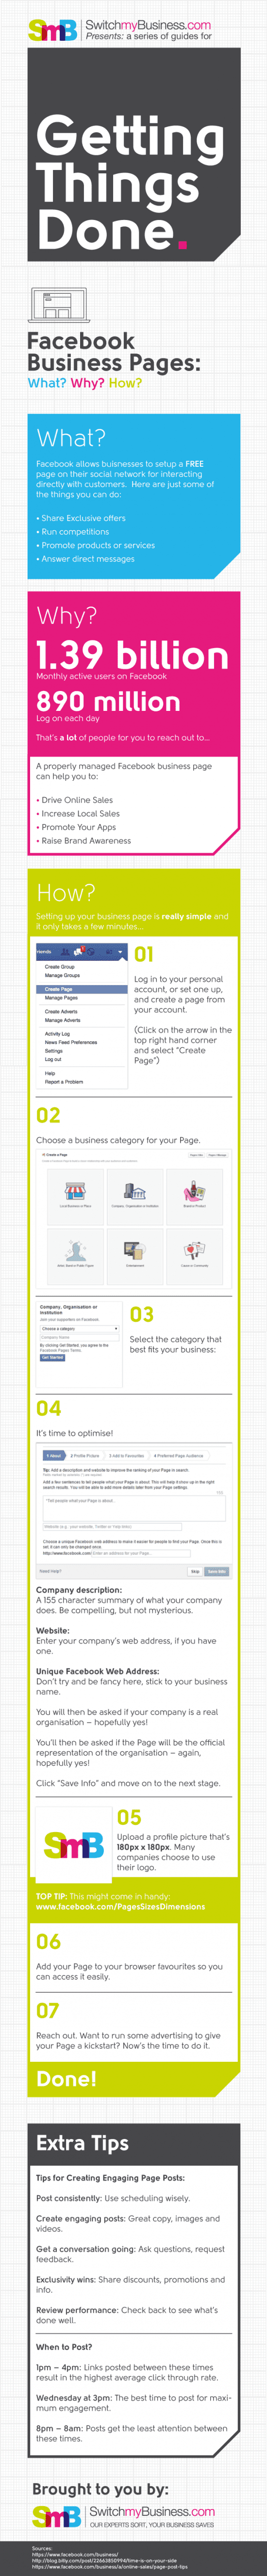 How to Create the Perfect Facebook Business Page [Start Guide]